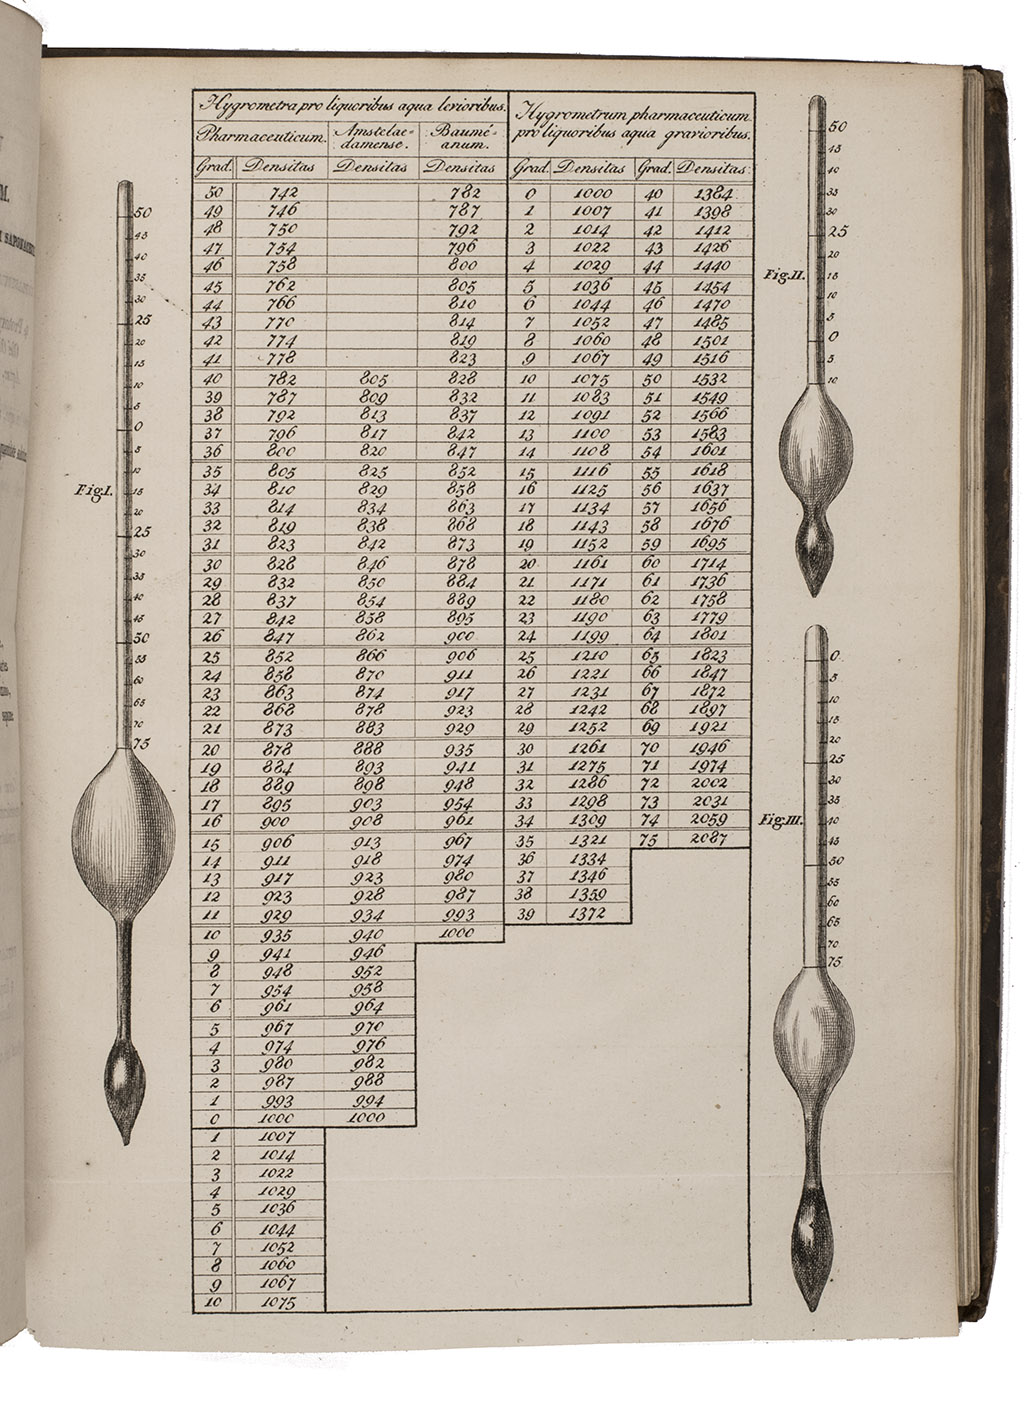 [NETHERLANDS & BELGIUM  PHARMACOPOEIA]. - Pharmacopoea Belgica.The Hague, Typographia Regia, 1823. Large 4to (26 x 22 cm). With an engraved plate showing a hygrometer. This copy numbered 1361 and with the authentication signature of Prof. Jac. Van Maanen. Contemporary gold-tooled tree calf.